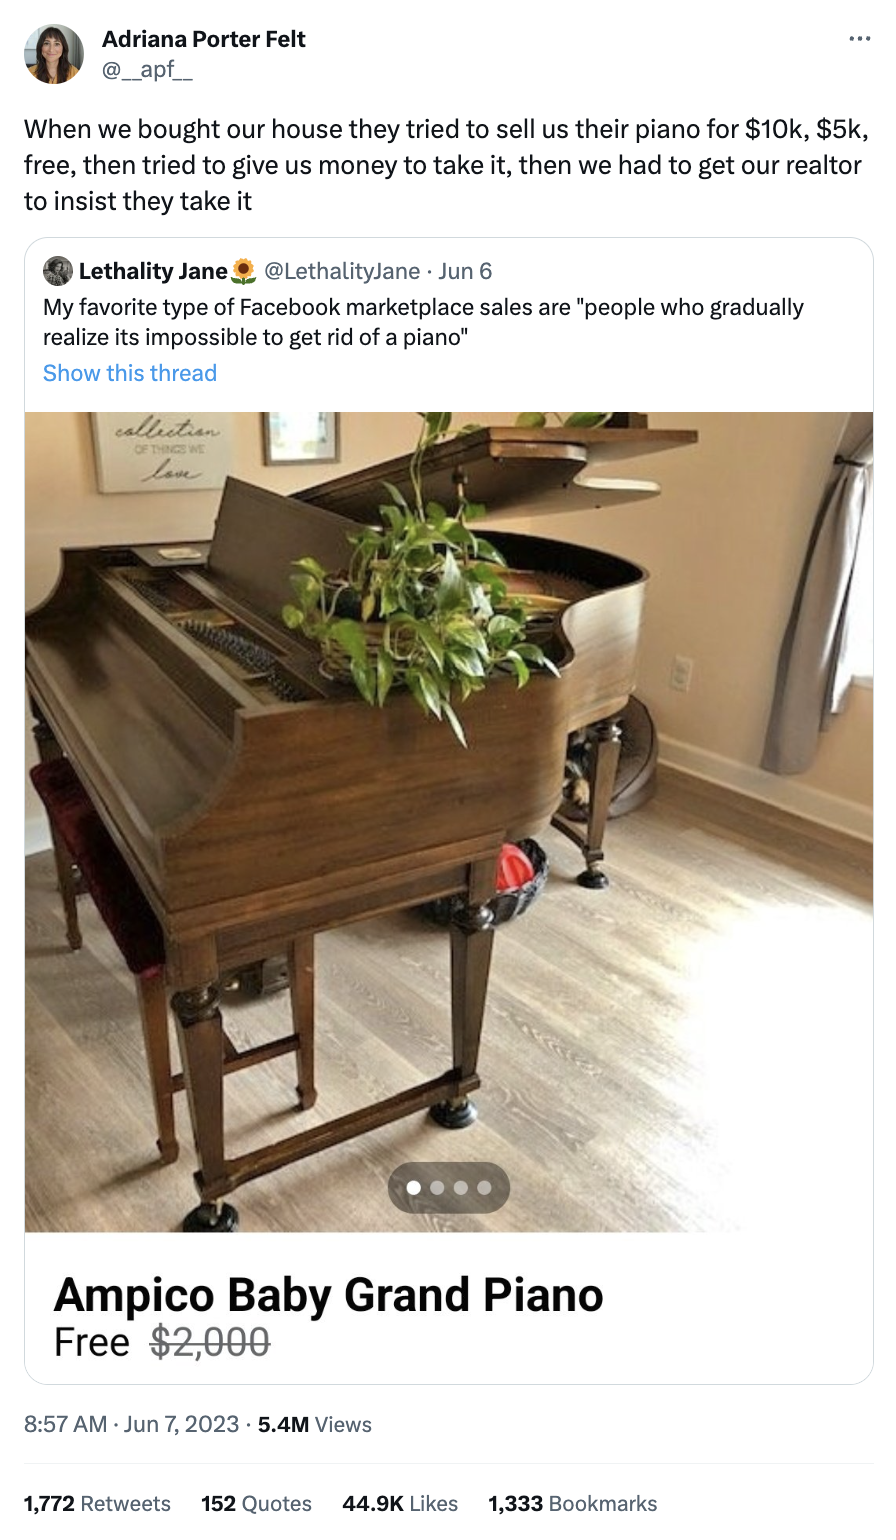 Tweet on Free Pianos with Home Purchase